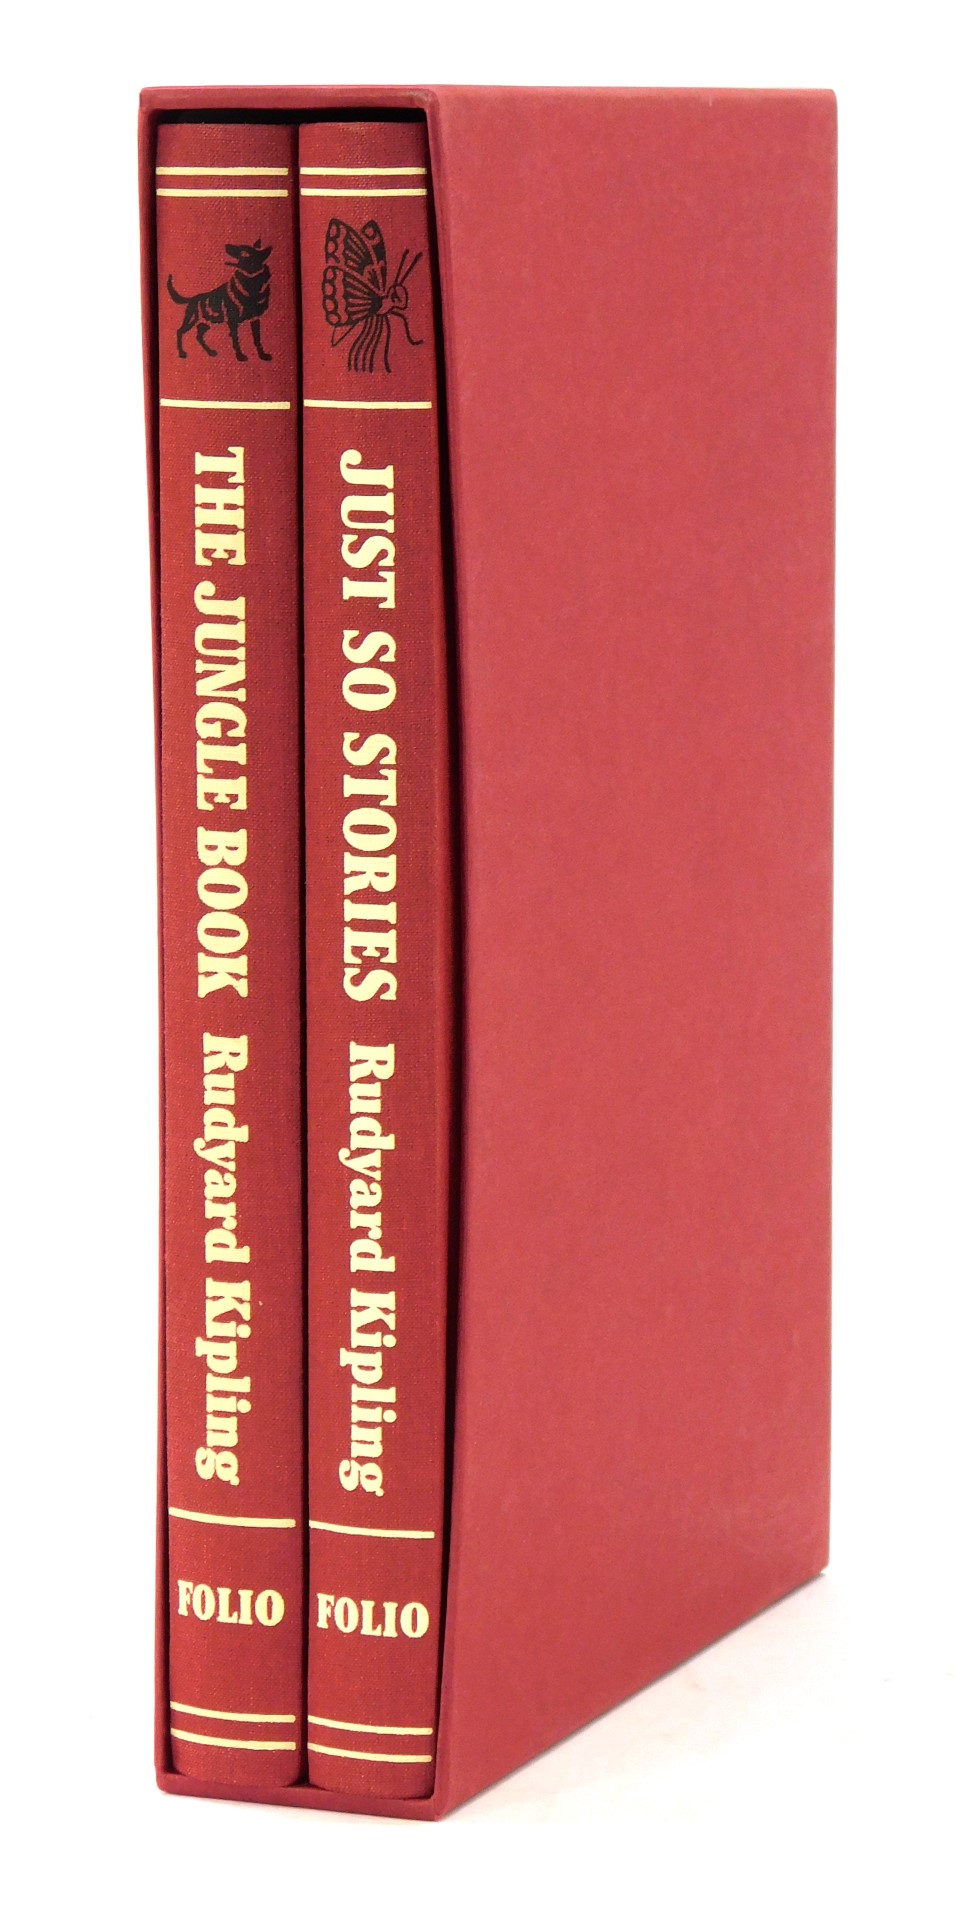 Kipling (Rudyard). The Jungle Book, and Just So Stories, two volumes in slip case published by The F